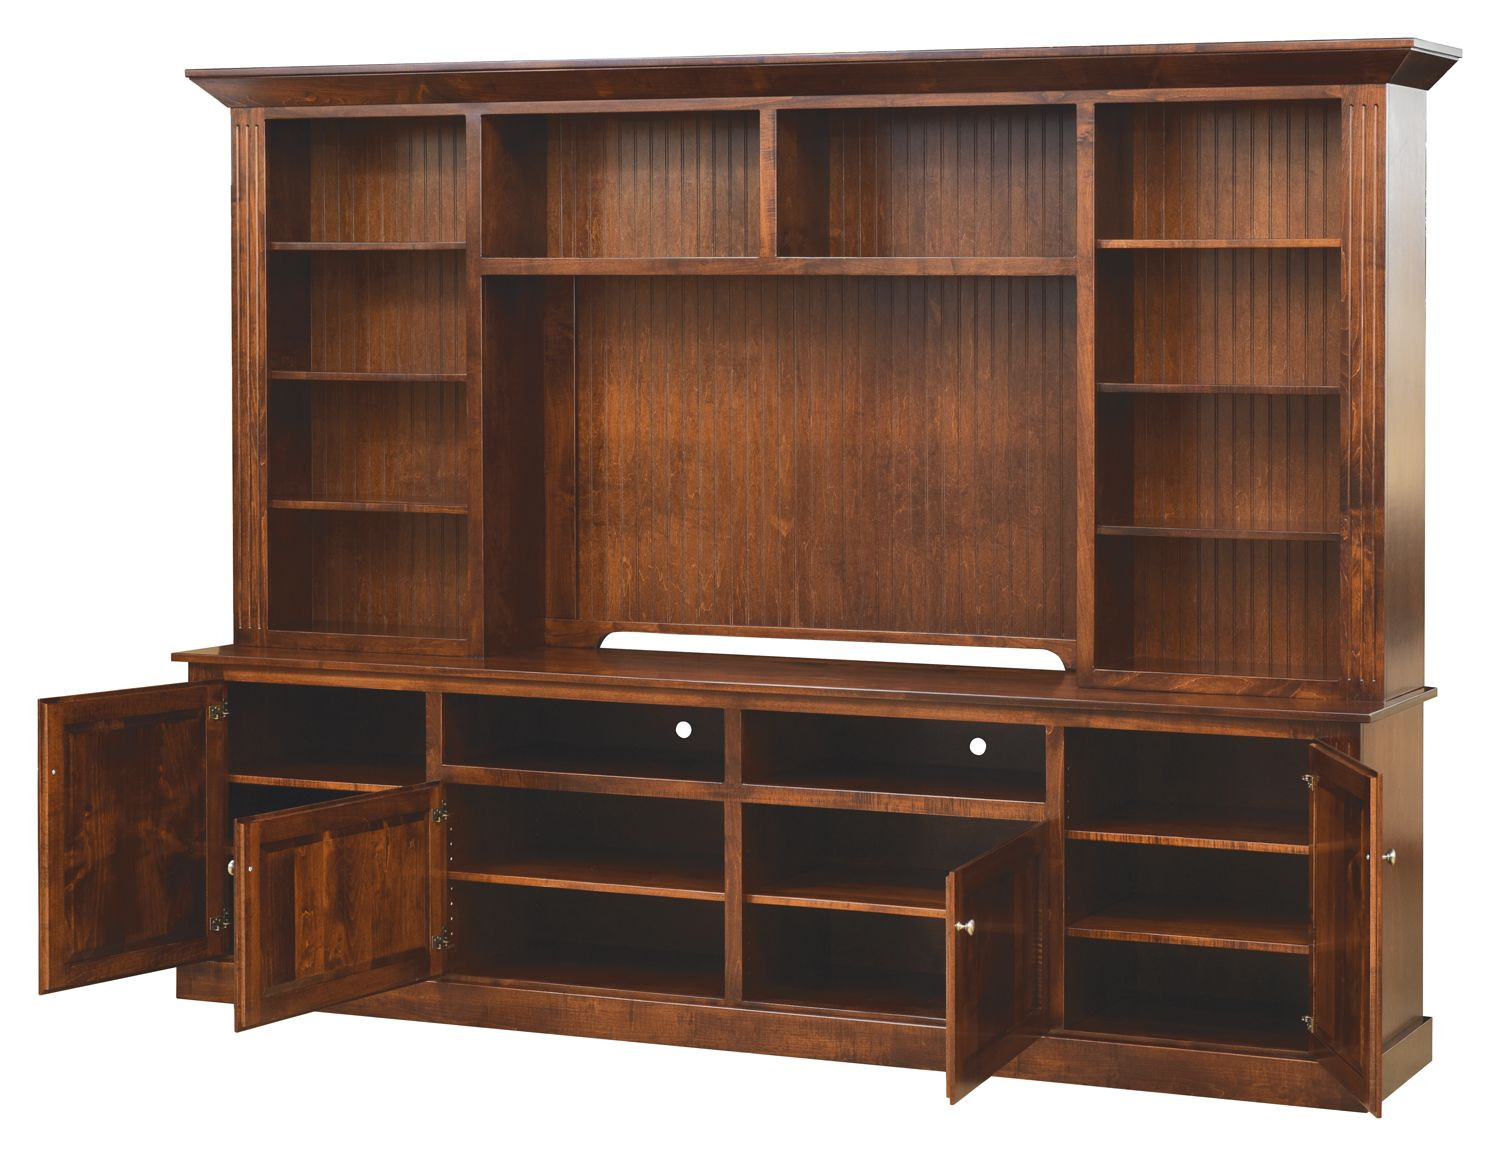 solid-wood-wall-unit-entertainment-center